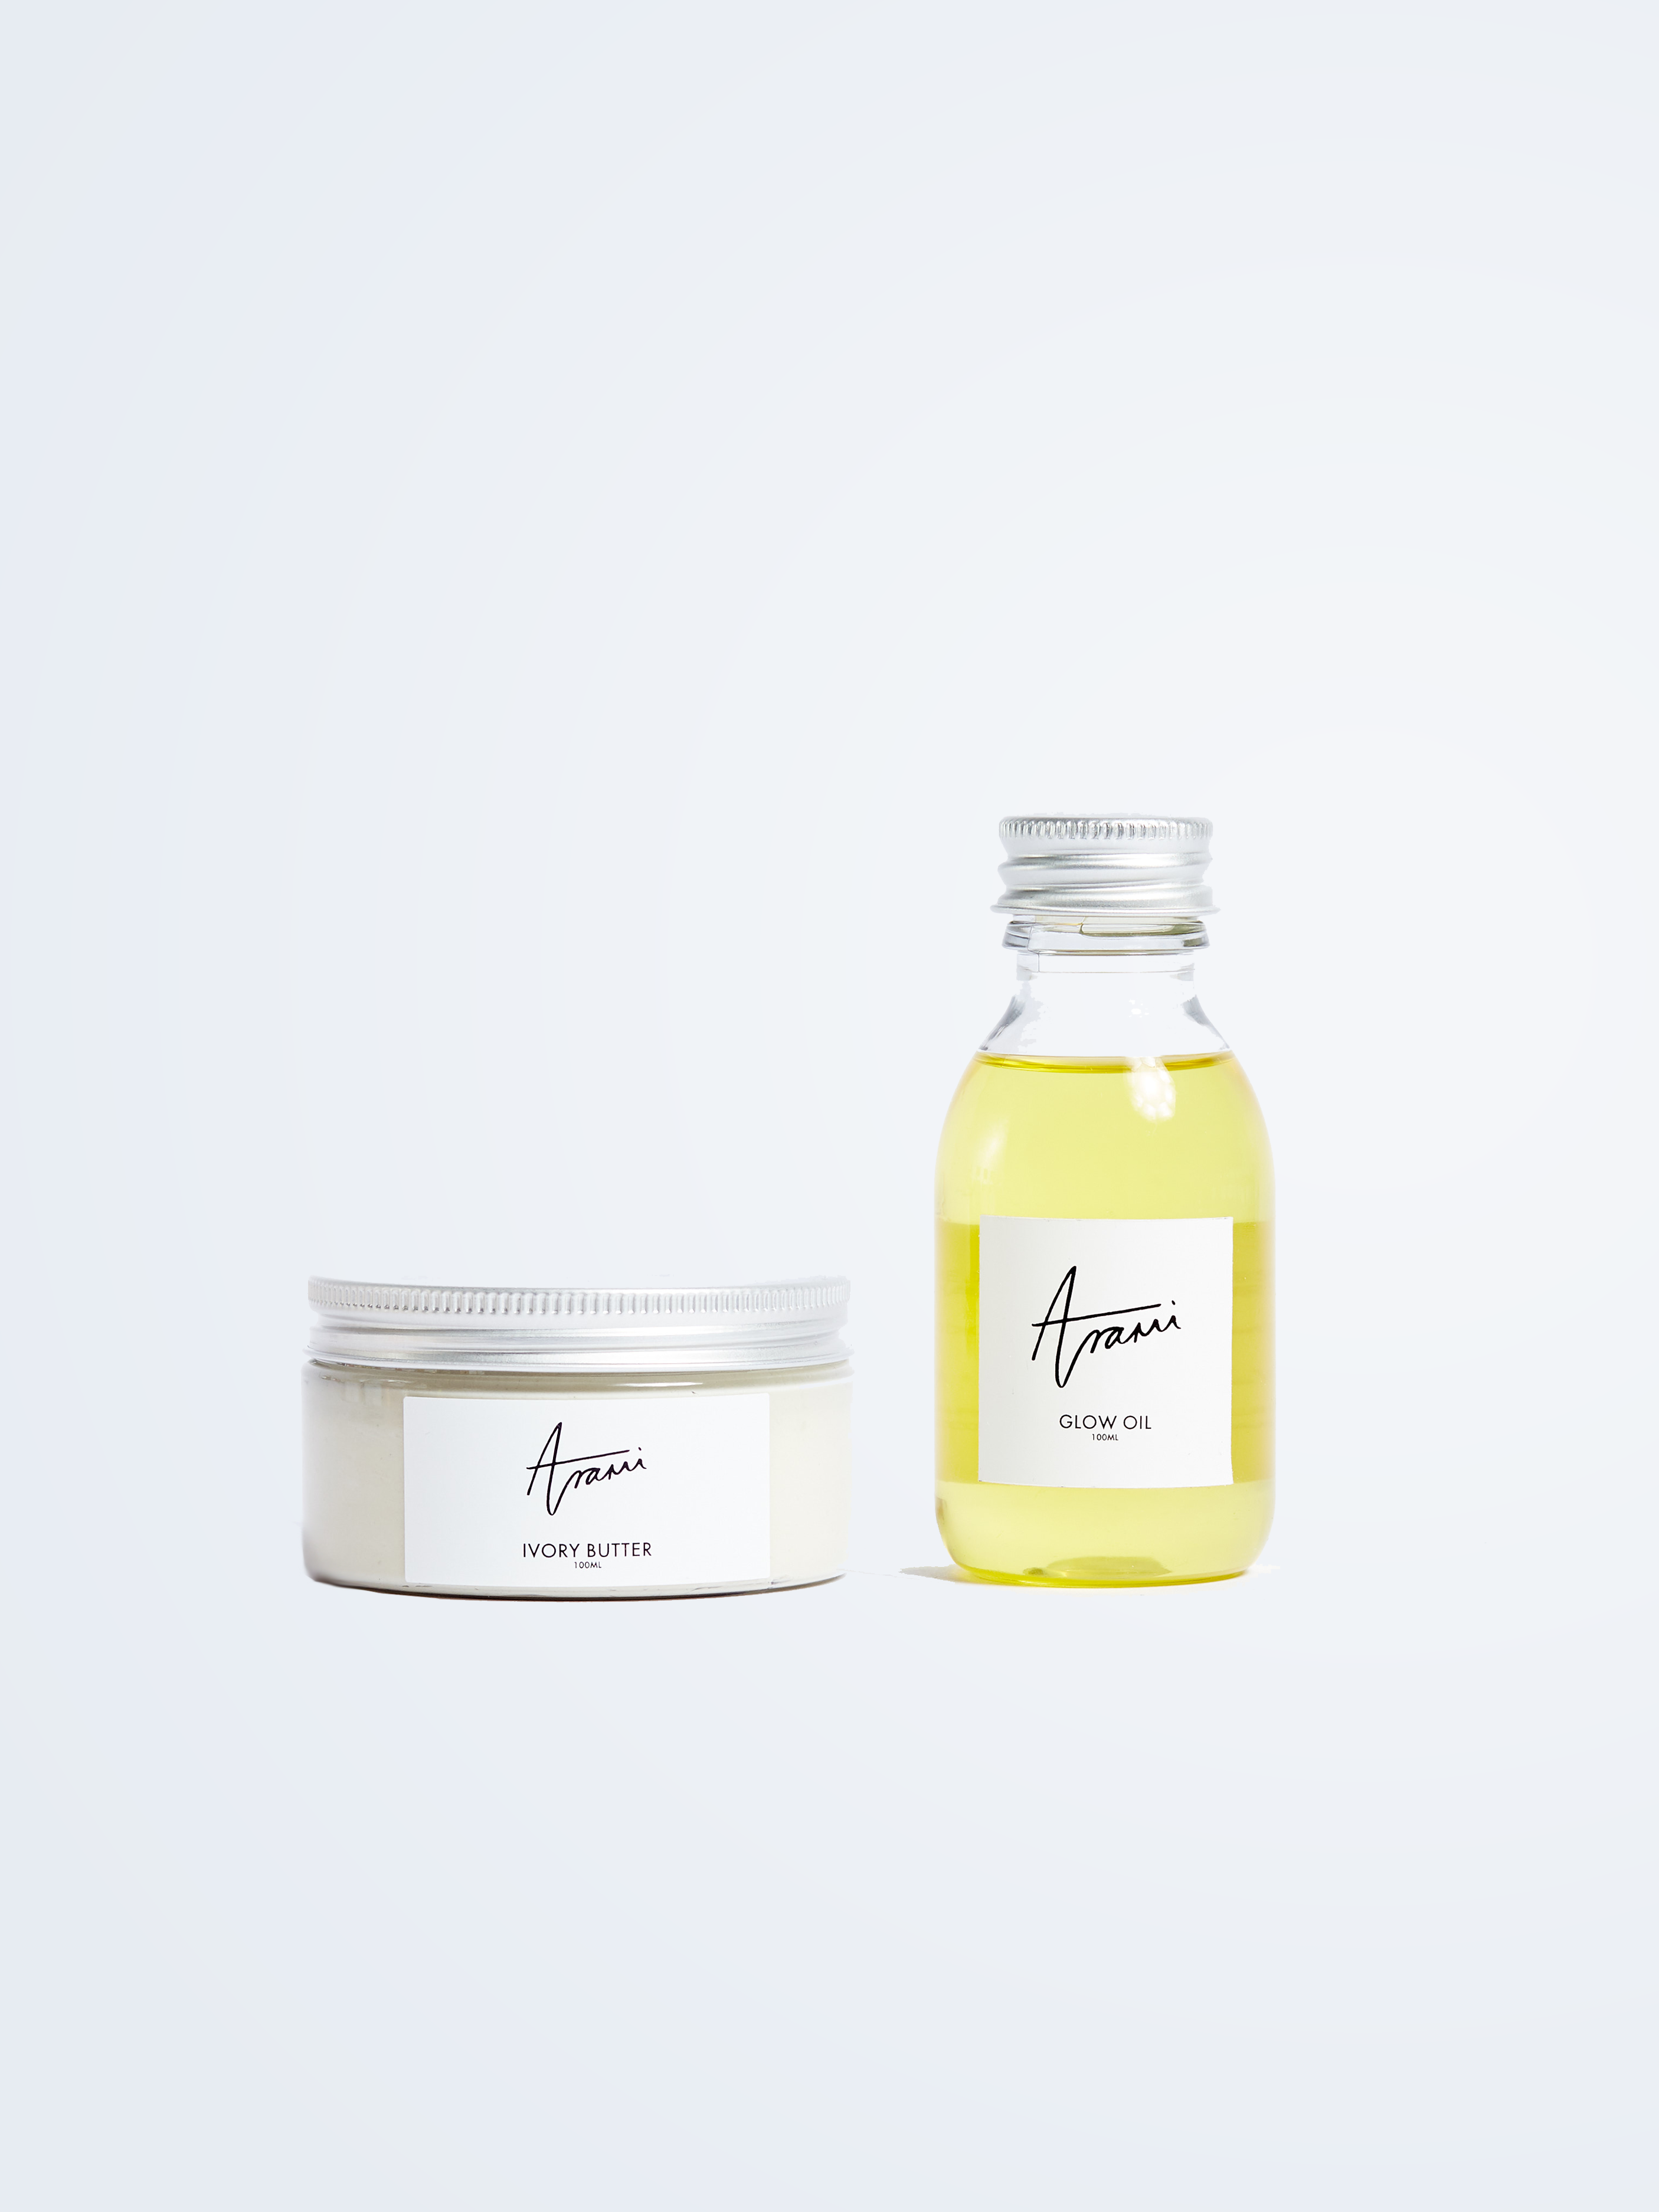 Two products for reconditioning skin.